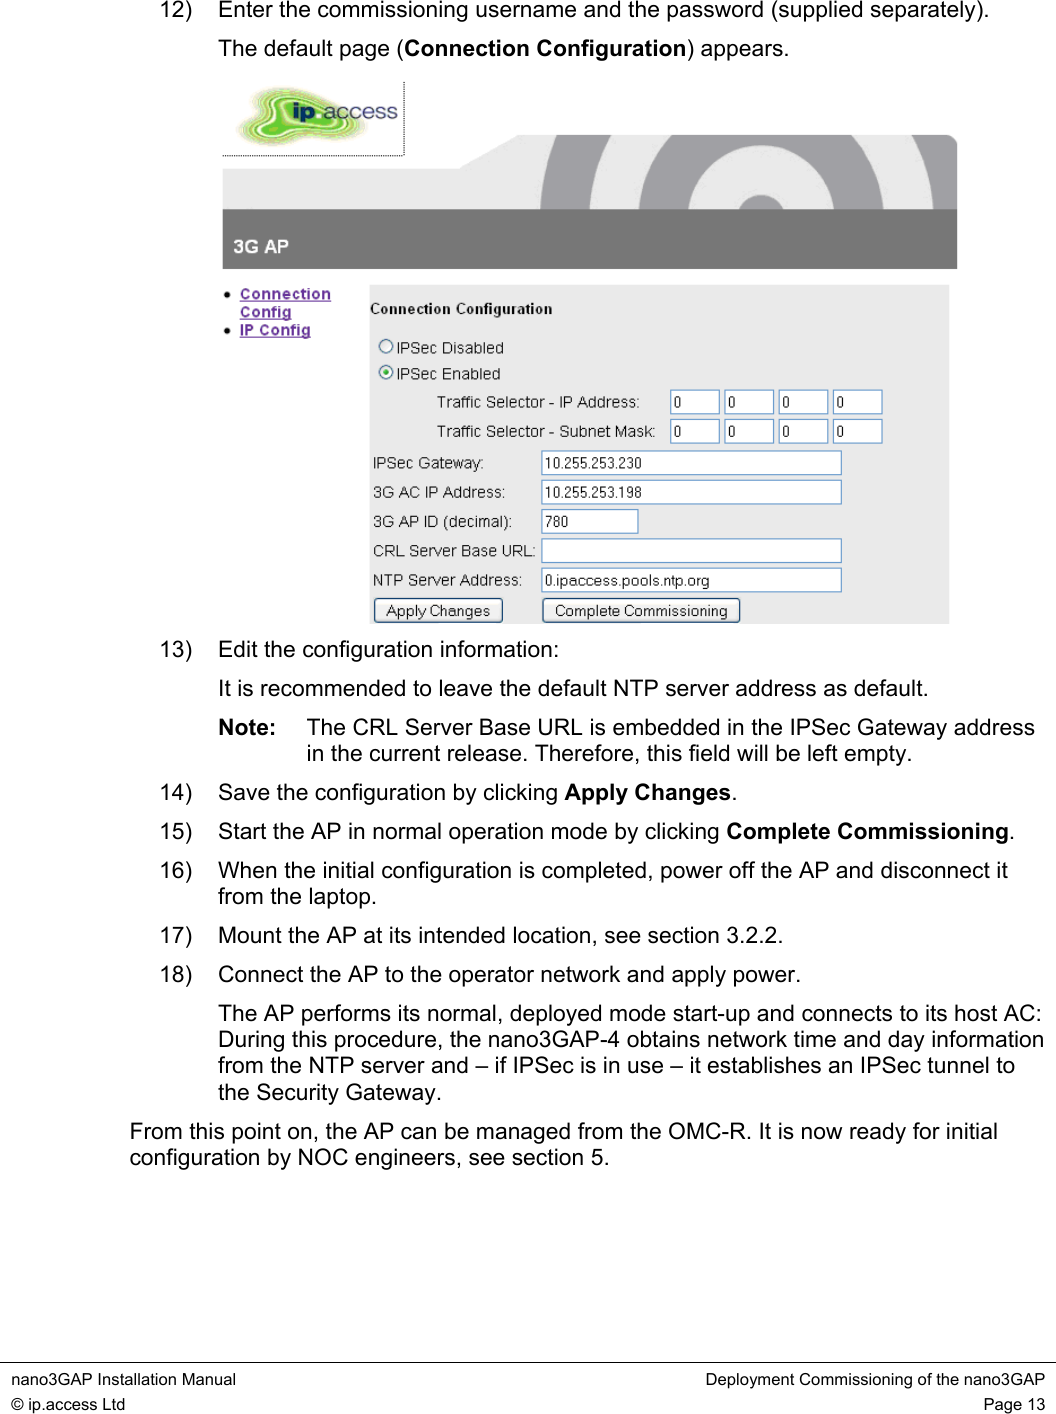  nano3GAP Installation Manual  Deployment Commissioning of the nano3GAP © ip.access Ltd  Page 13  12)  Enter the commissioning username and the password (supplied separately). The default page (Connection Configuration) appears.  13)  Edit the configuration information: It is recommended to leave the default NTP server address as default. Note:  The CRL Server Base URL is embedded in the IPSec Gateway address in the current release. Therefore, this field will be left empty.  14)  Save the configuration by clicking Apply Changes. 15)  Start the AP in normal operation mode by clicking Complete Commissioning. 16)  When the initial configuration is completed, power off the AP and disconnect it from the laptop. 17)  Mount the AP at its intended location, see section 3.2.2. 18)  Connect the AP to the operator network and apply power. The AP performs its normal, deployed mode start-up and connects to its host AC: During this procedure, the nano3GAP-4 obtains network time and day information from the NTP server and – if IPSec is in use – it establishes an IPSec tunnel to the Security Gateway. From this point on, the AP can be managed from the OMC-R. It is now ready for initial configuration by NOC engineers, see section 5.    